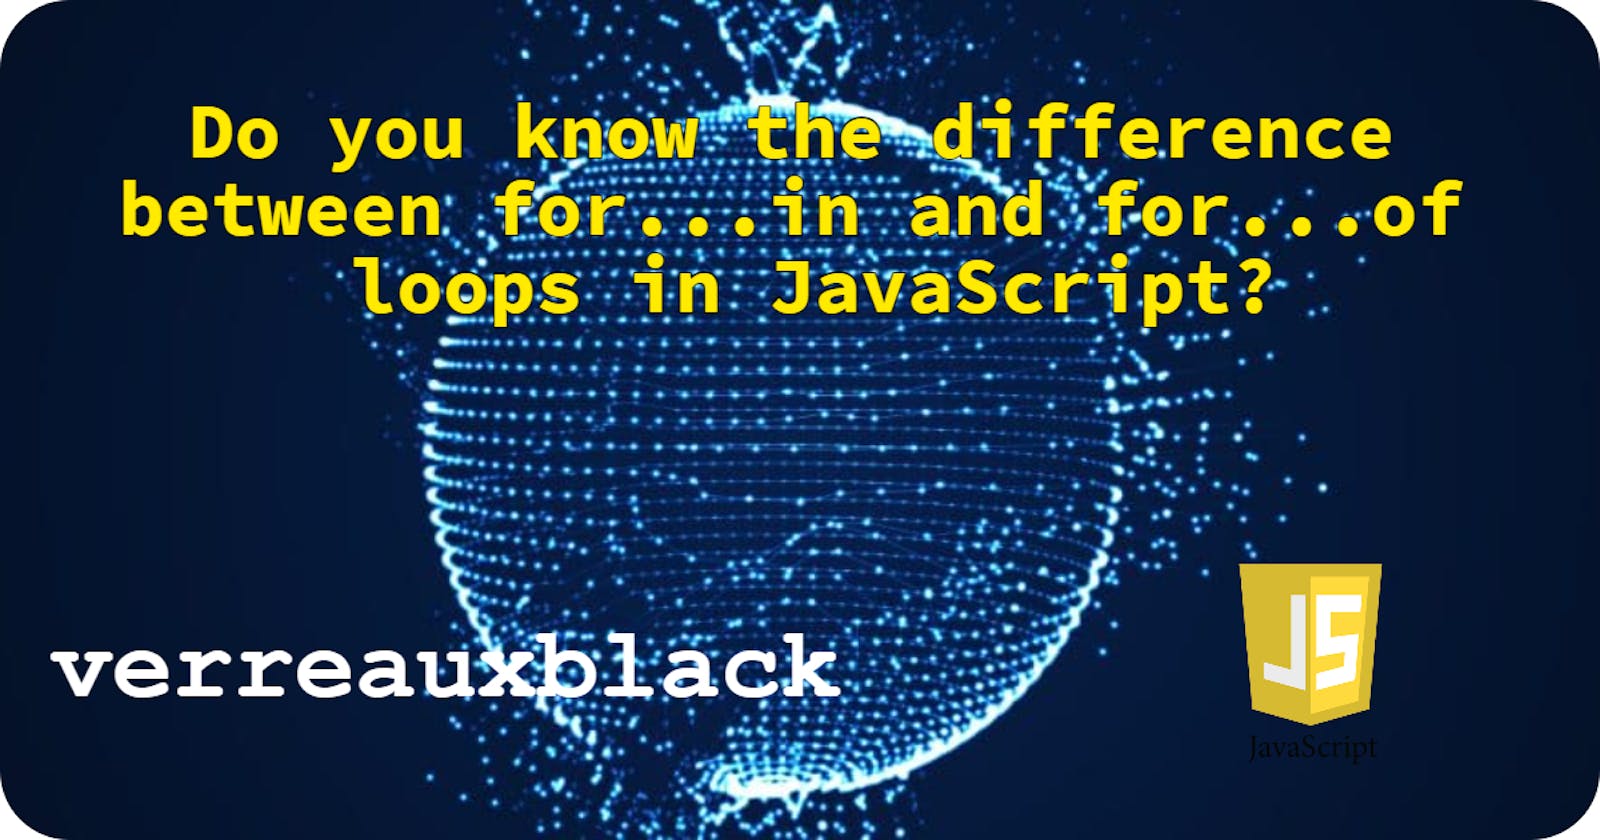 Do you know the difference between for...in and for...of loops in JavaScript?